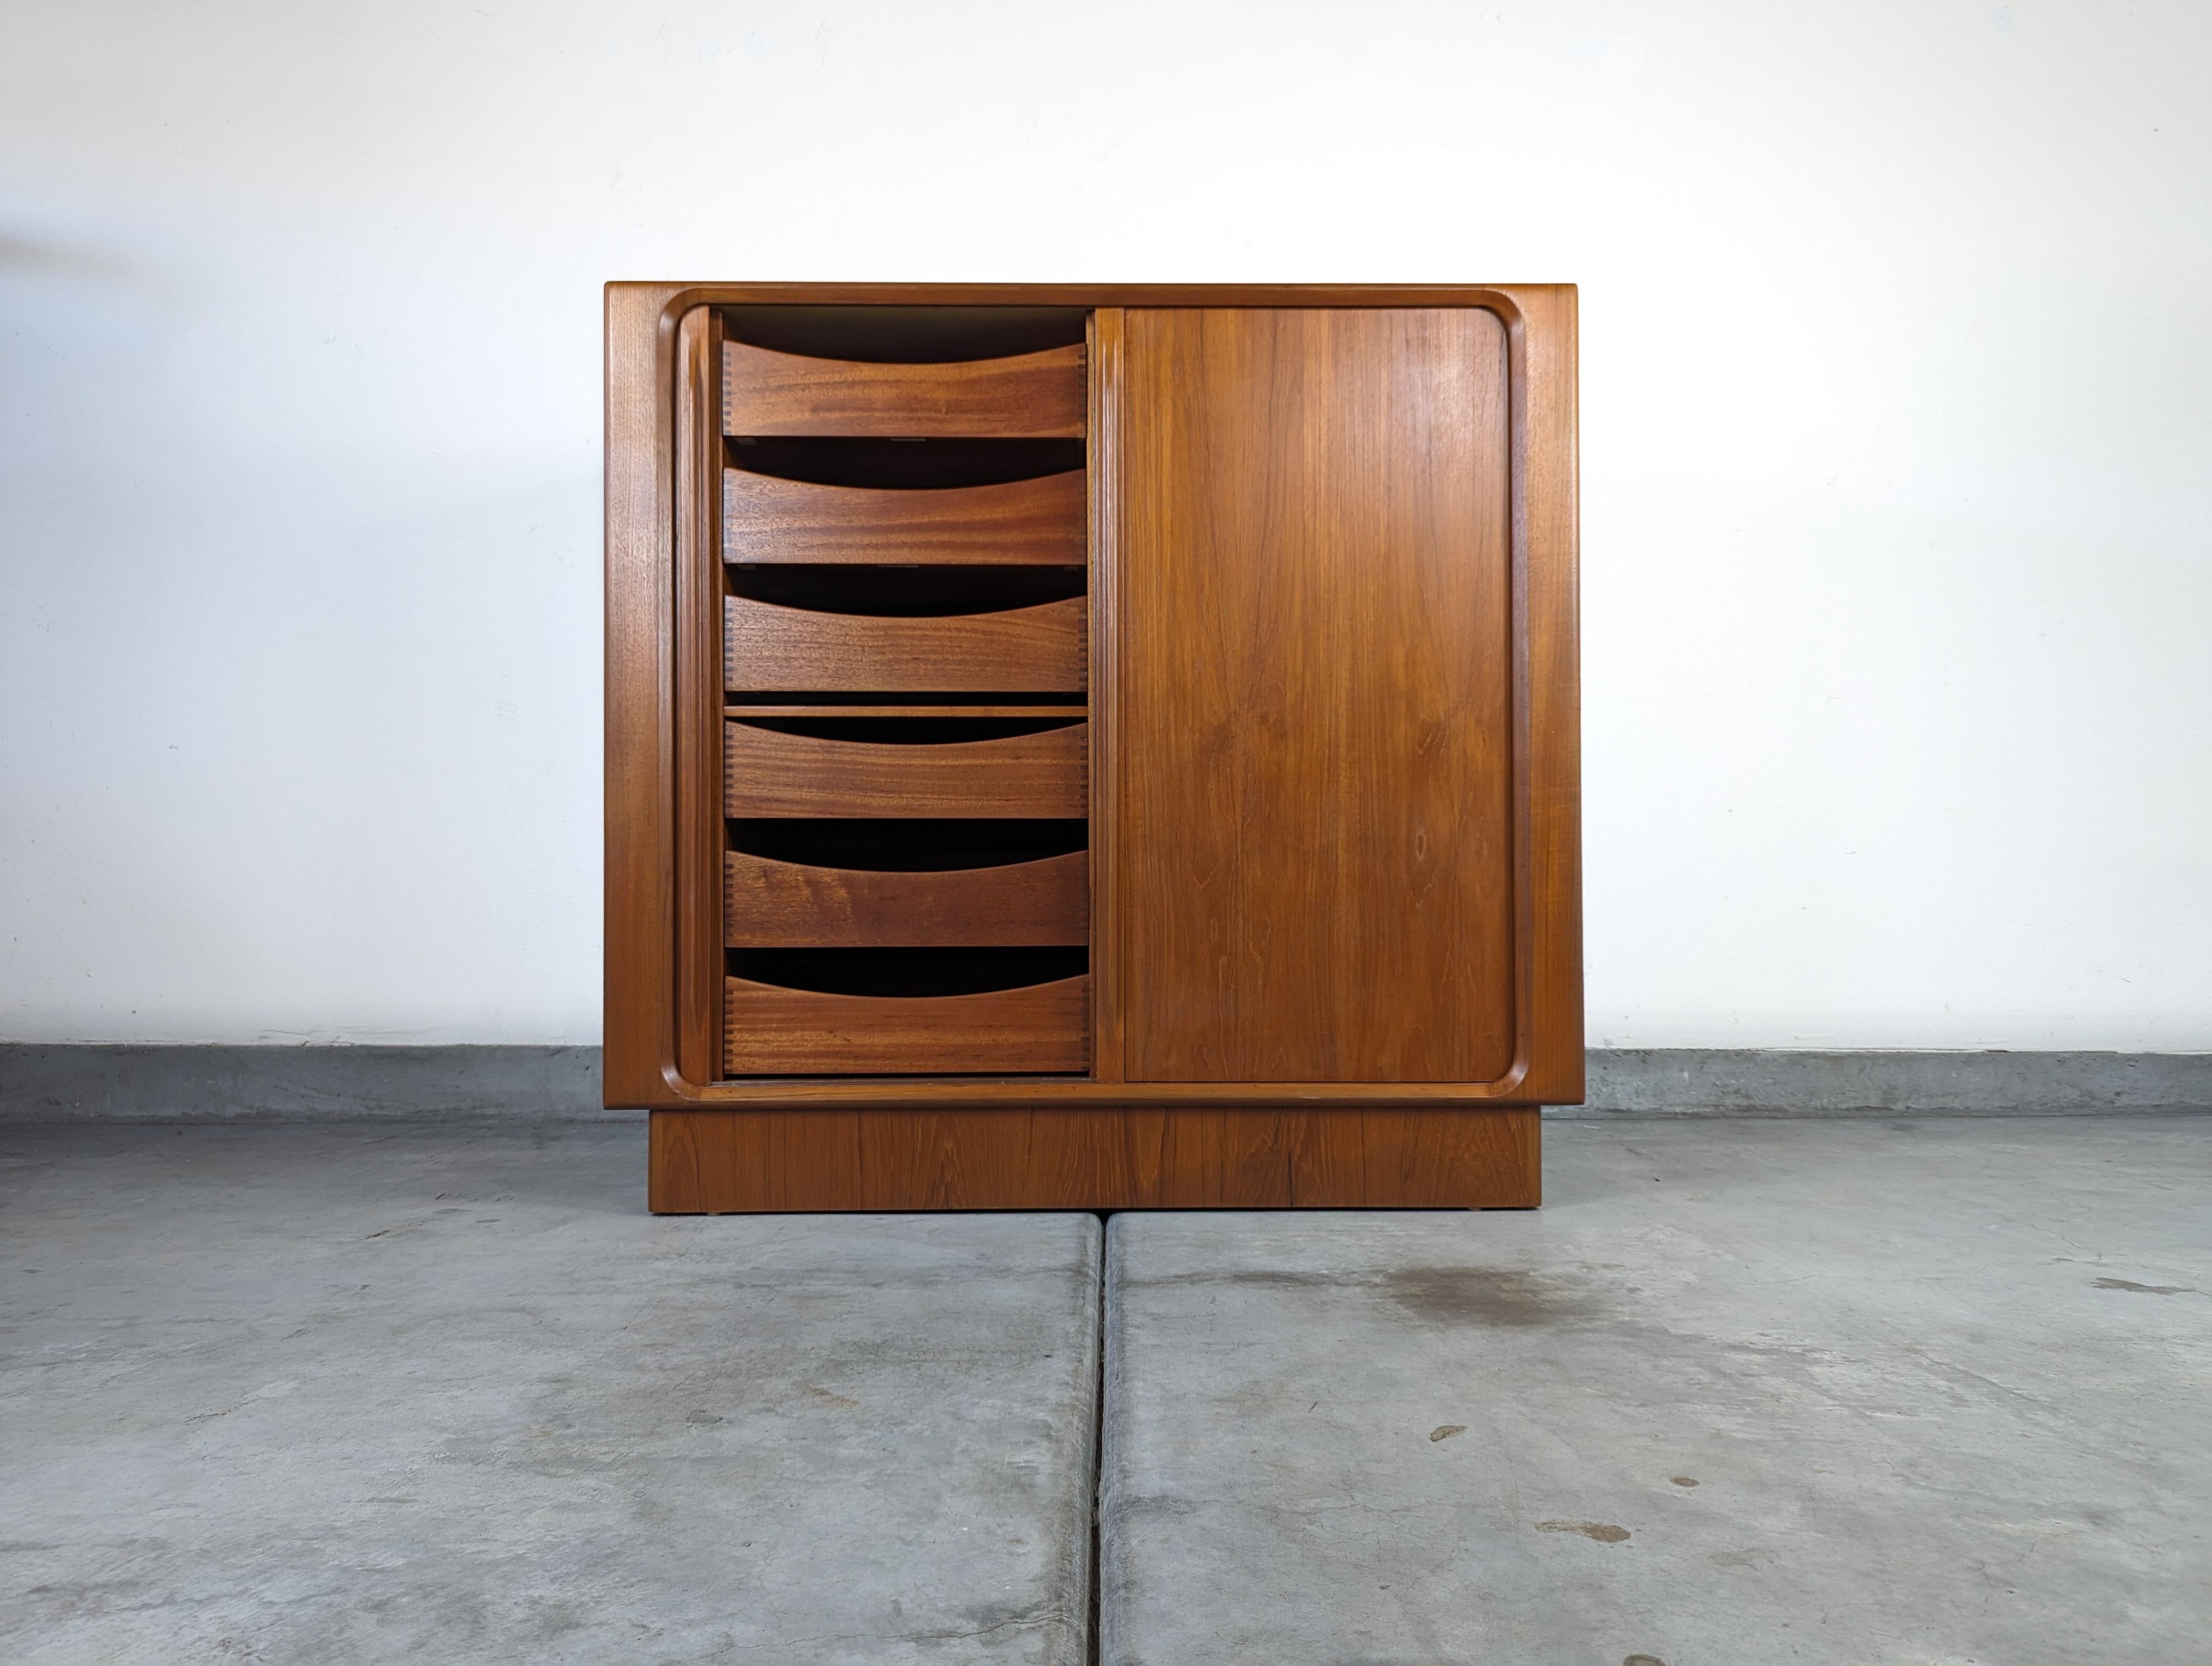 Step into the world of timeless elegance with this exquisite vintage mid-century Danish modern Tambour Door Chest, crafted by the esteemed Bernhard Pedersen & Son in the 1960s. This magnificent piece showcases the sleek, clean lines and functional